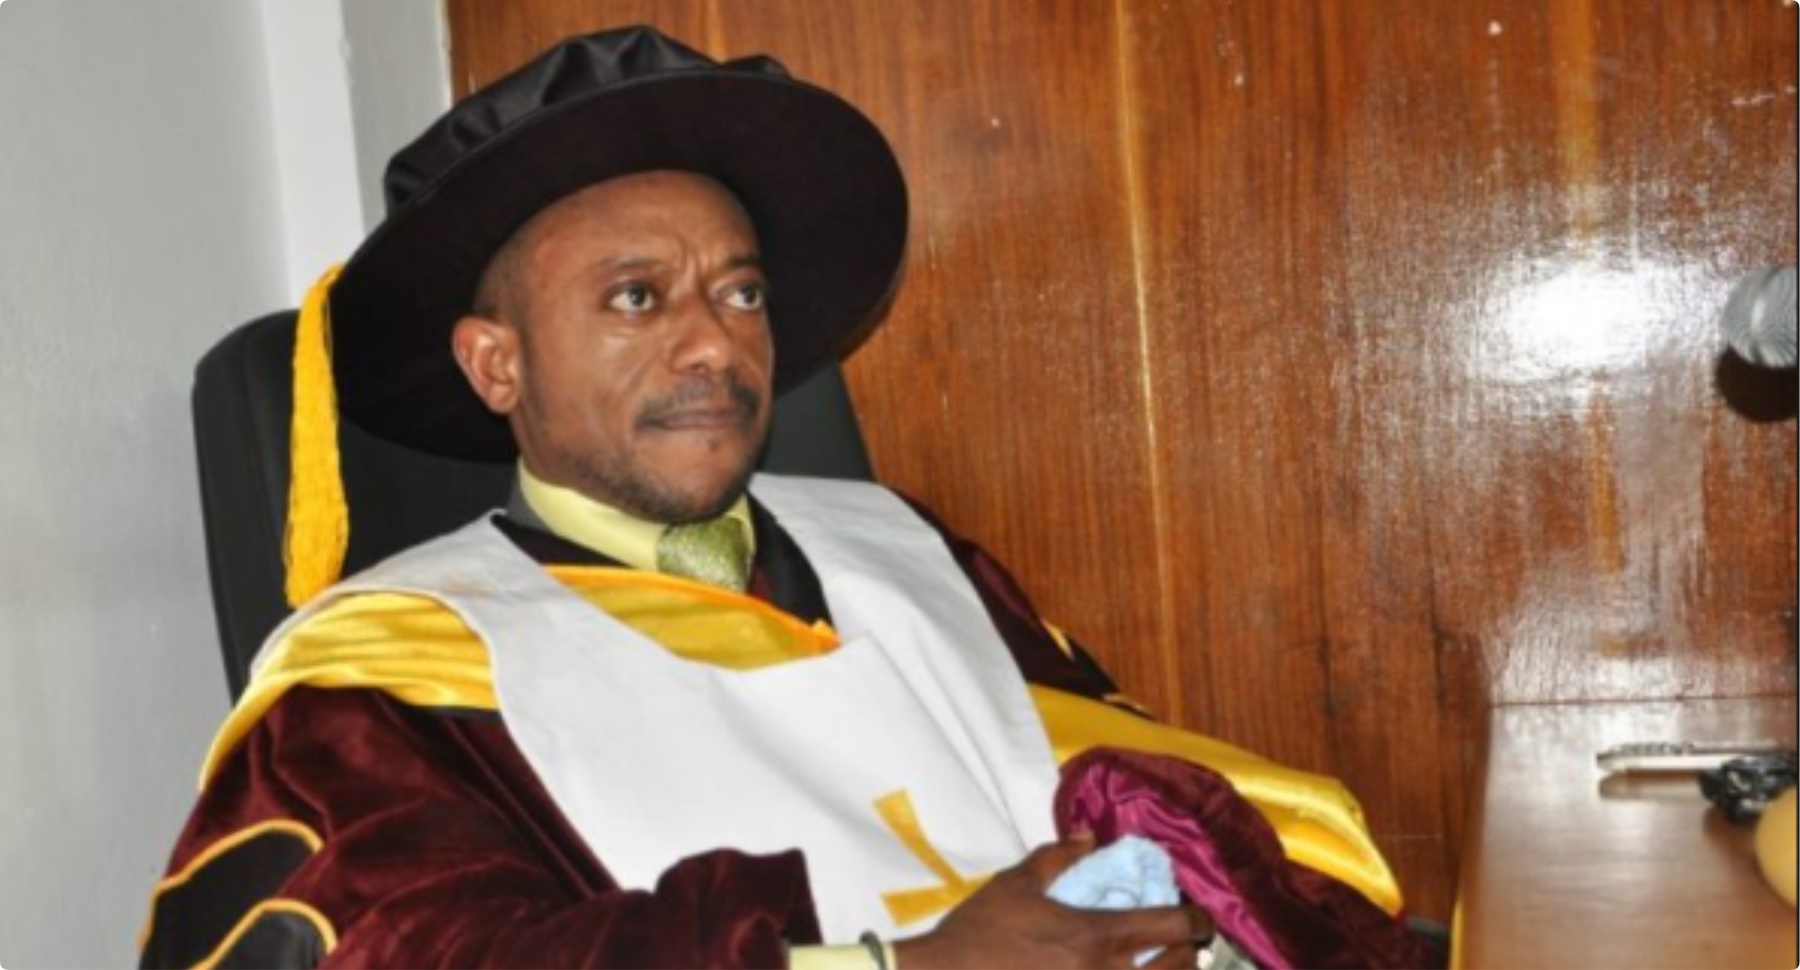 'Ignore the chaos and come to church on Sunday' - Owusu Bempah's junior pastor